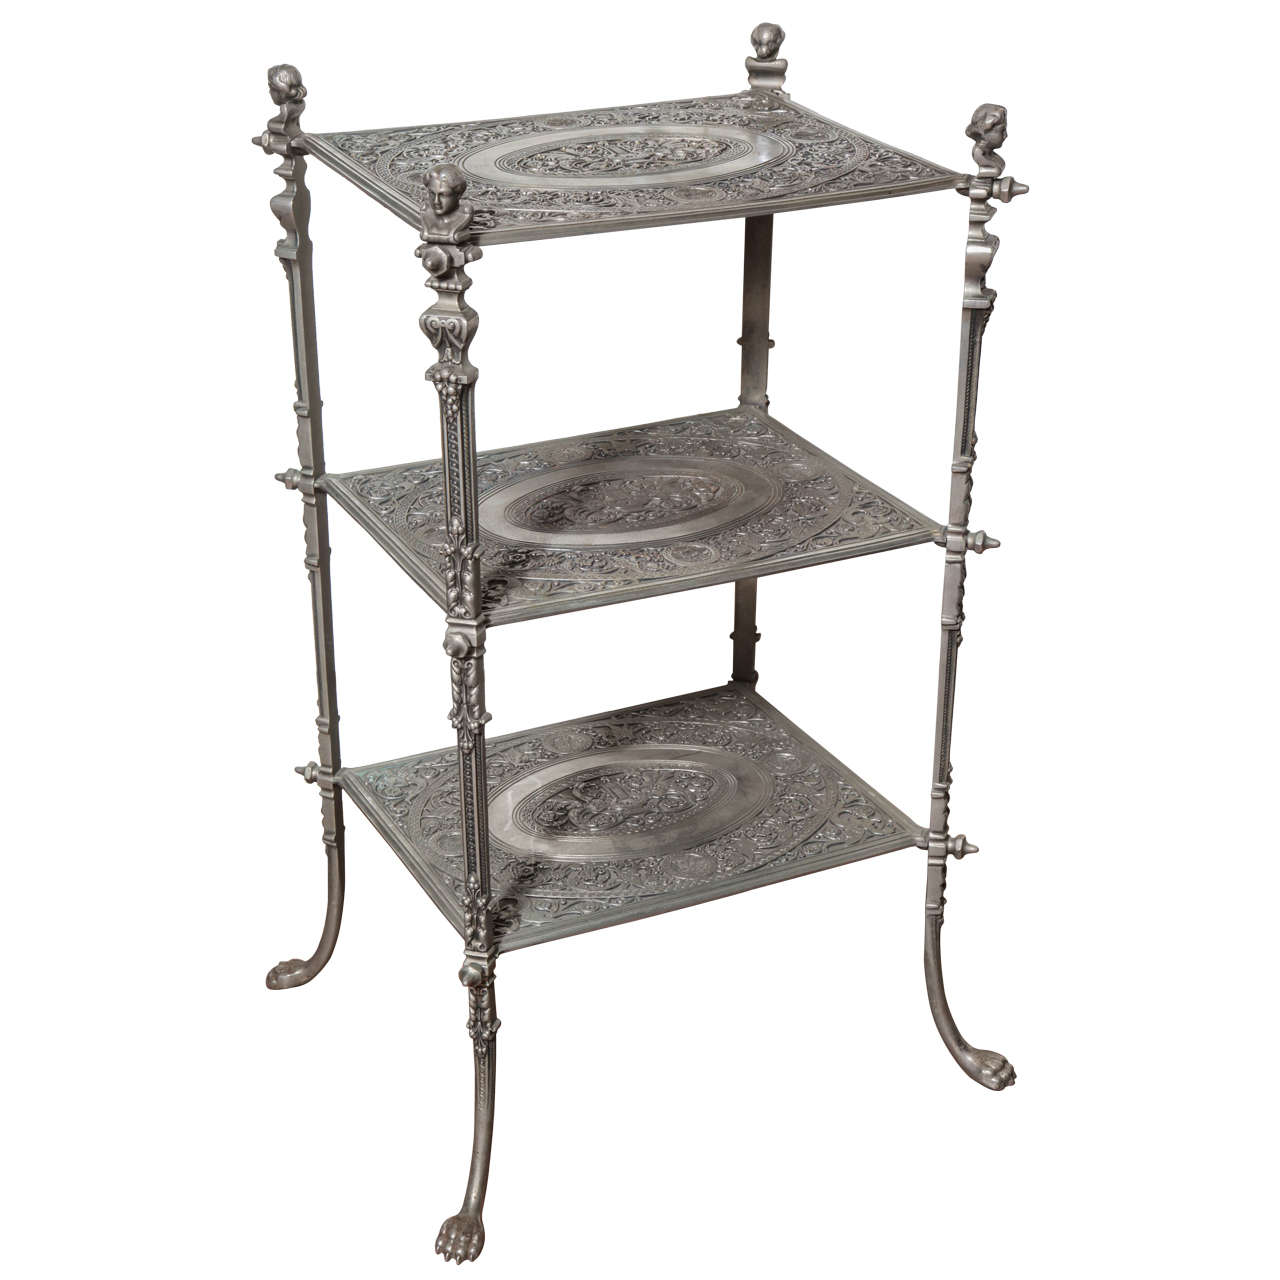 Antique Mägdesprunger Obelisk Cast Iron Table from Germany, circa 19th Century For Sale